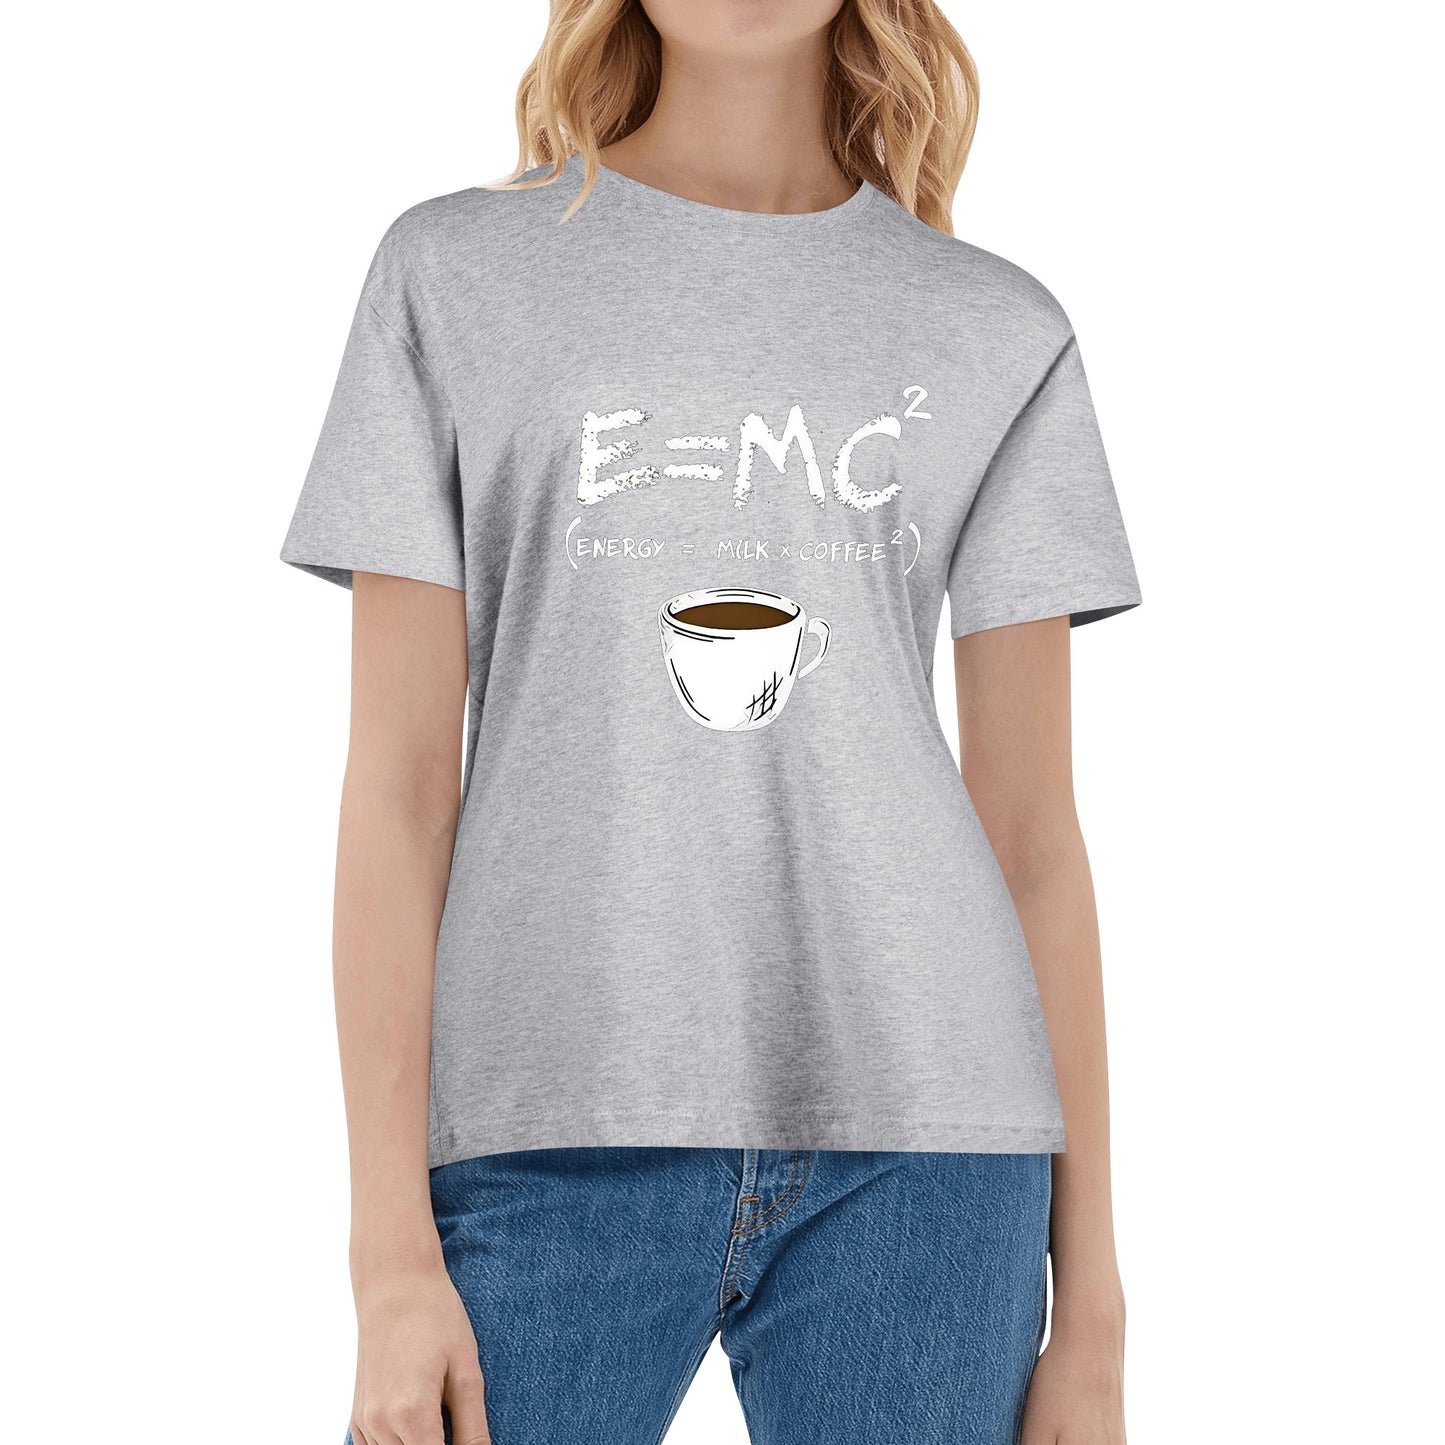 T-Shirt energy equals milk times coffee squared